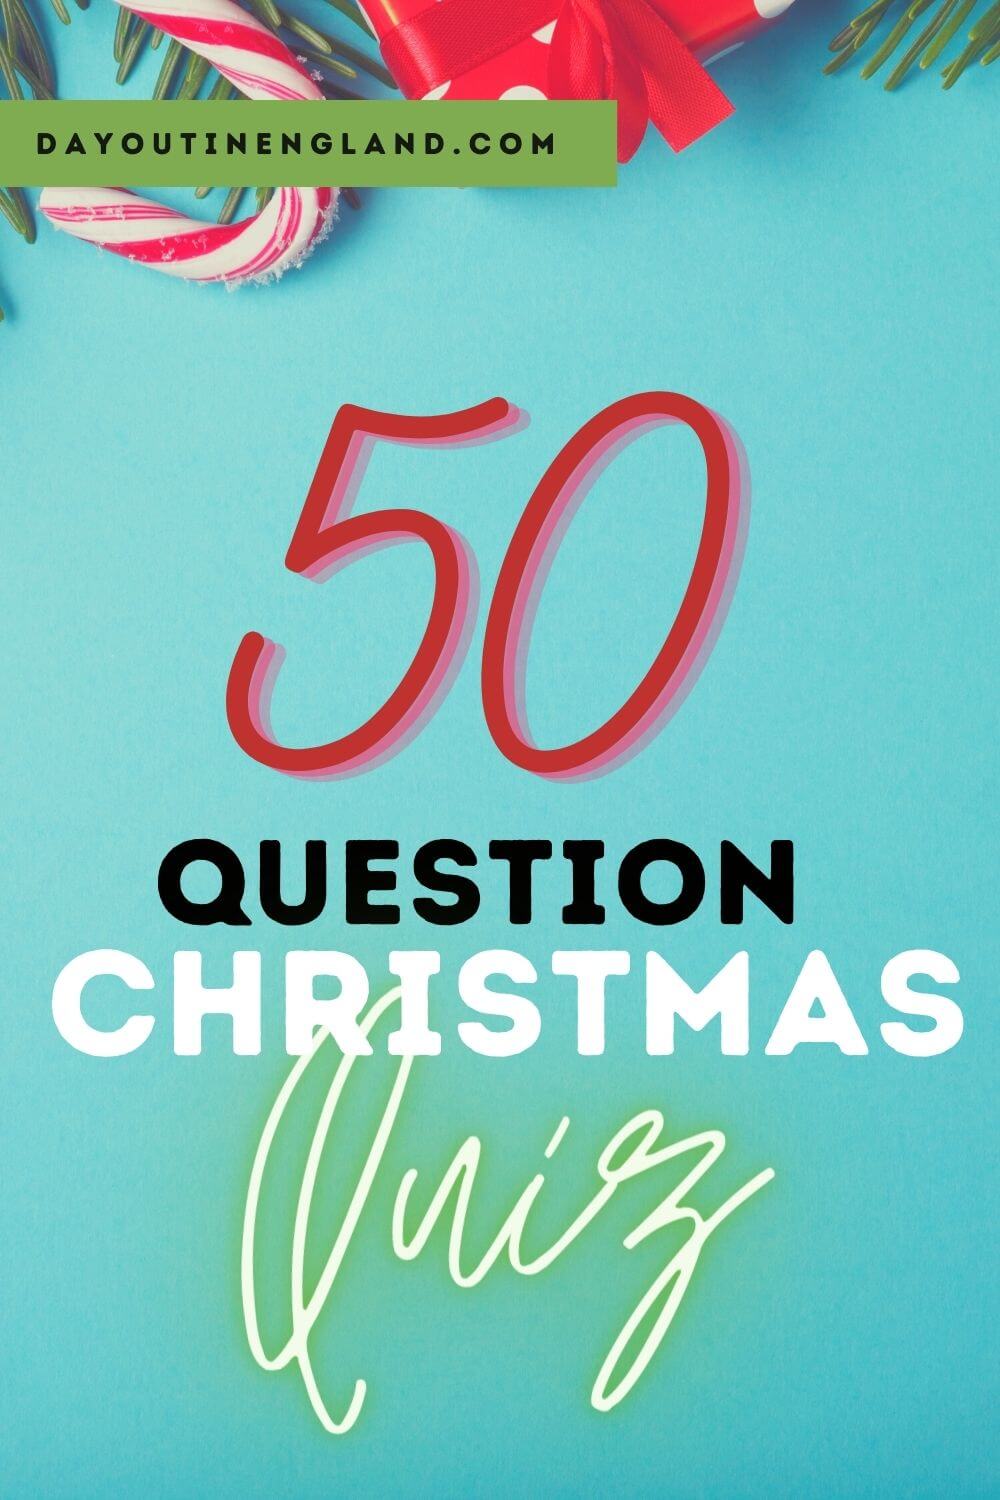 BIG England Christmas Quiz 50 Questions Day Out in England